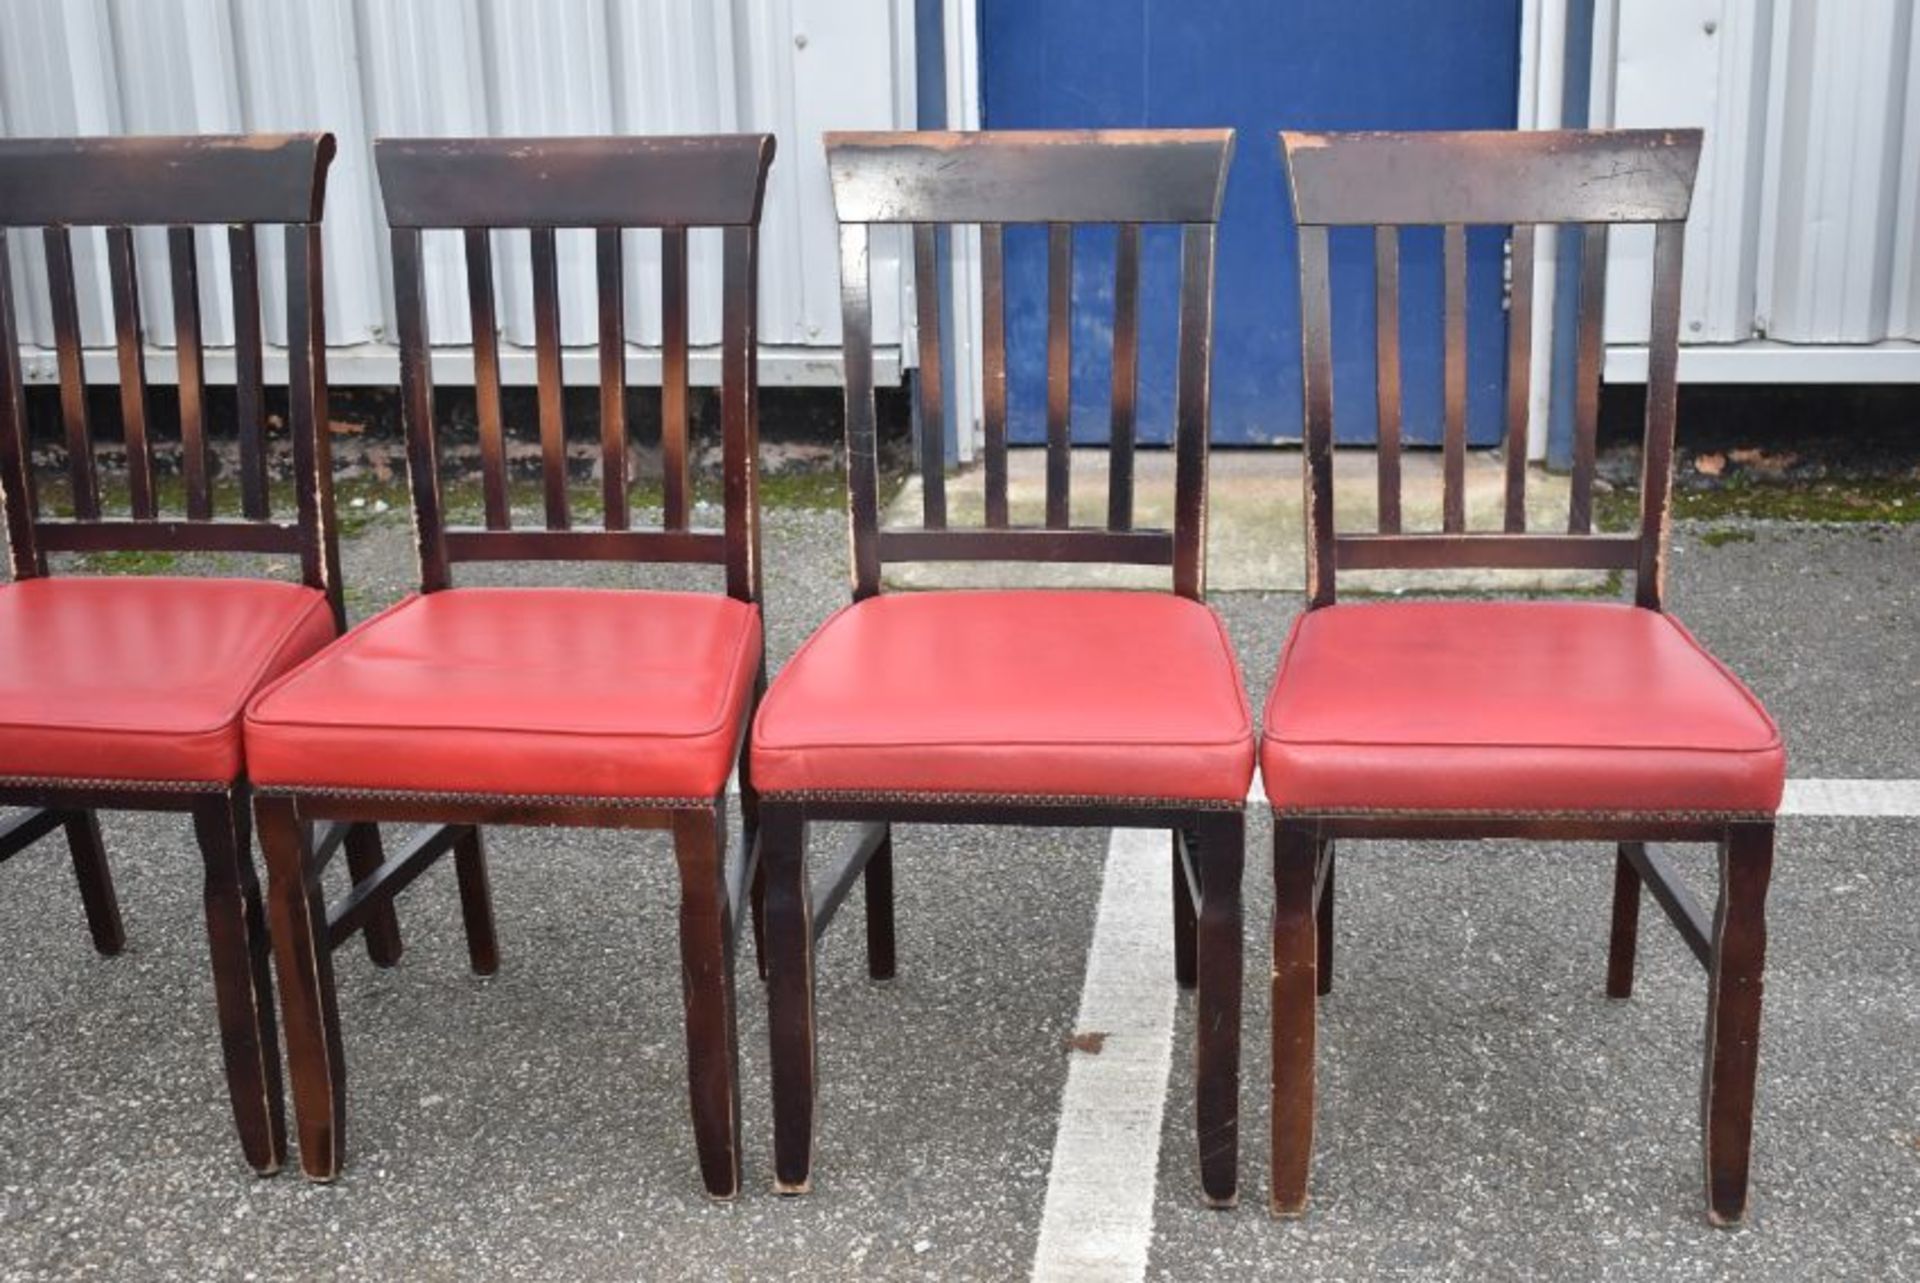 16 x Restaurant Dining Chairs With Dark Stained Wood Finish and Red Leather Seat Pads - Recently - Image 5 of 7